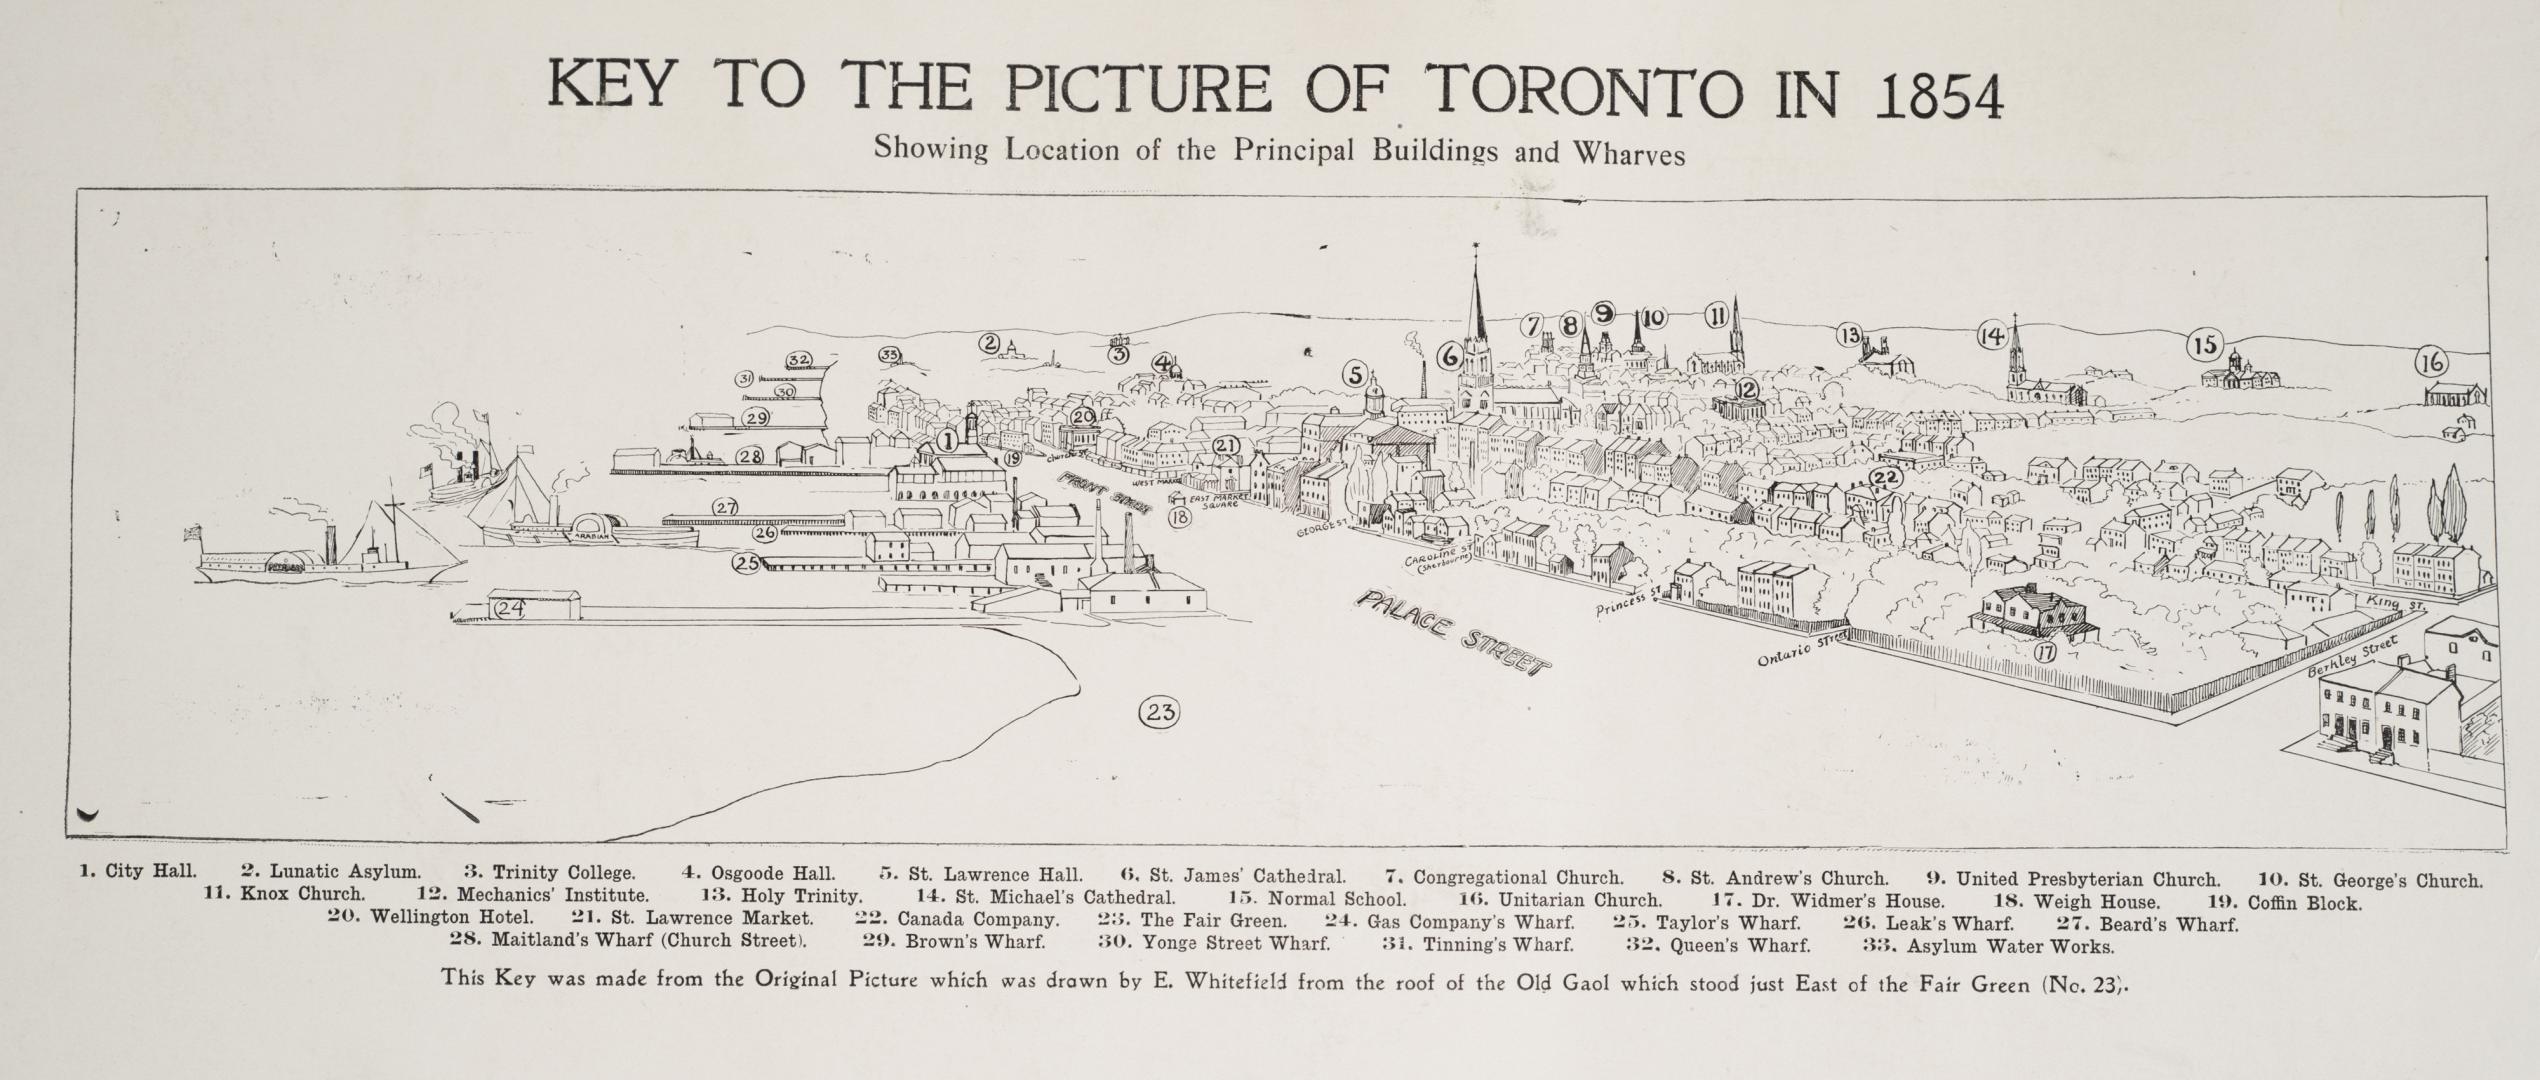 Image shows a street view. It reads "Key to the Picture of Toronto in 1854".